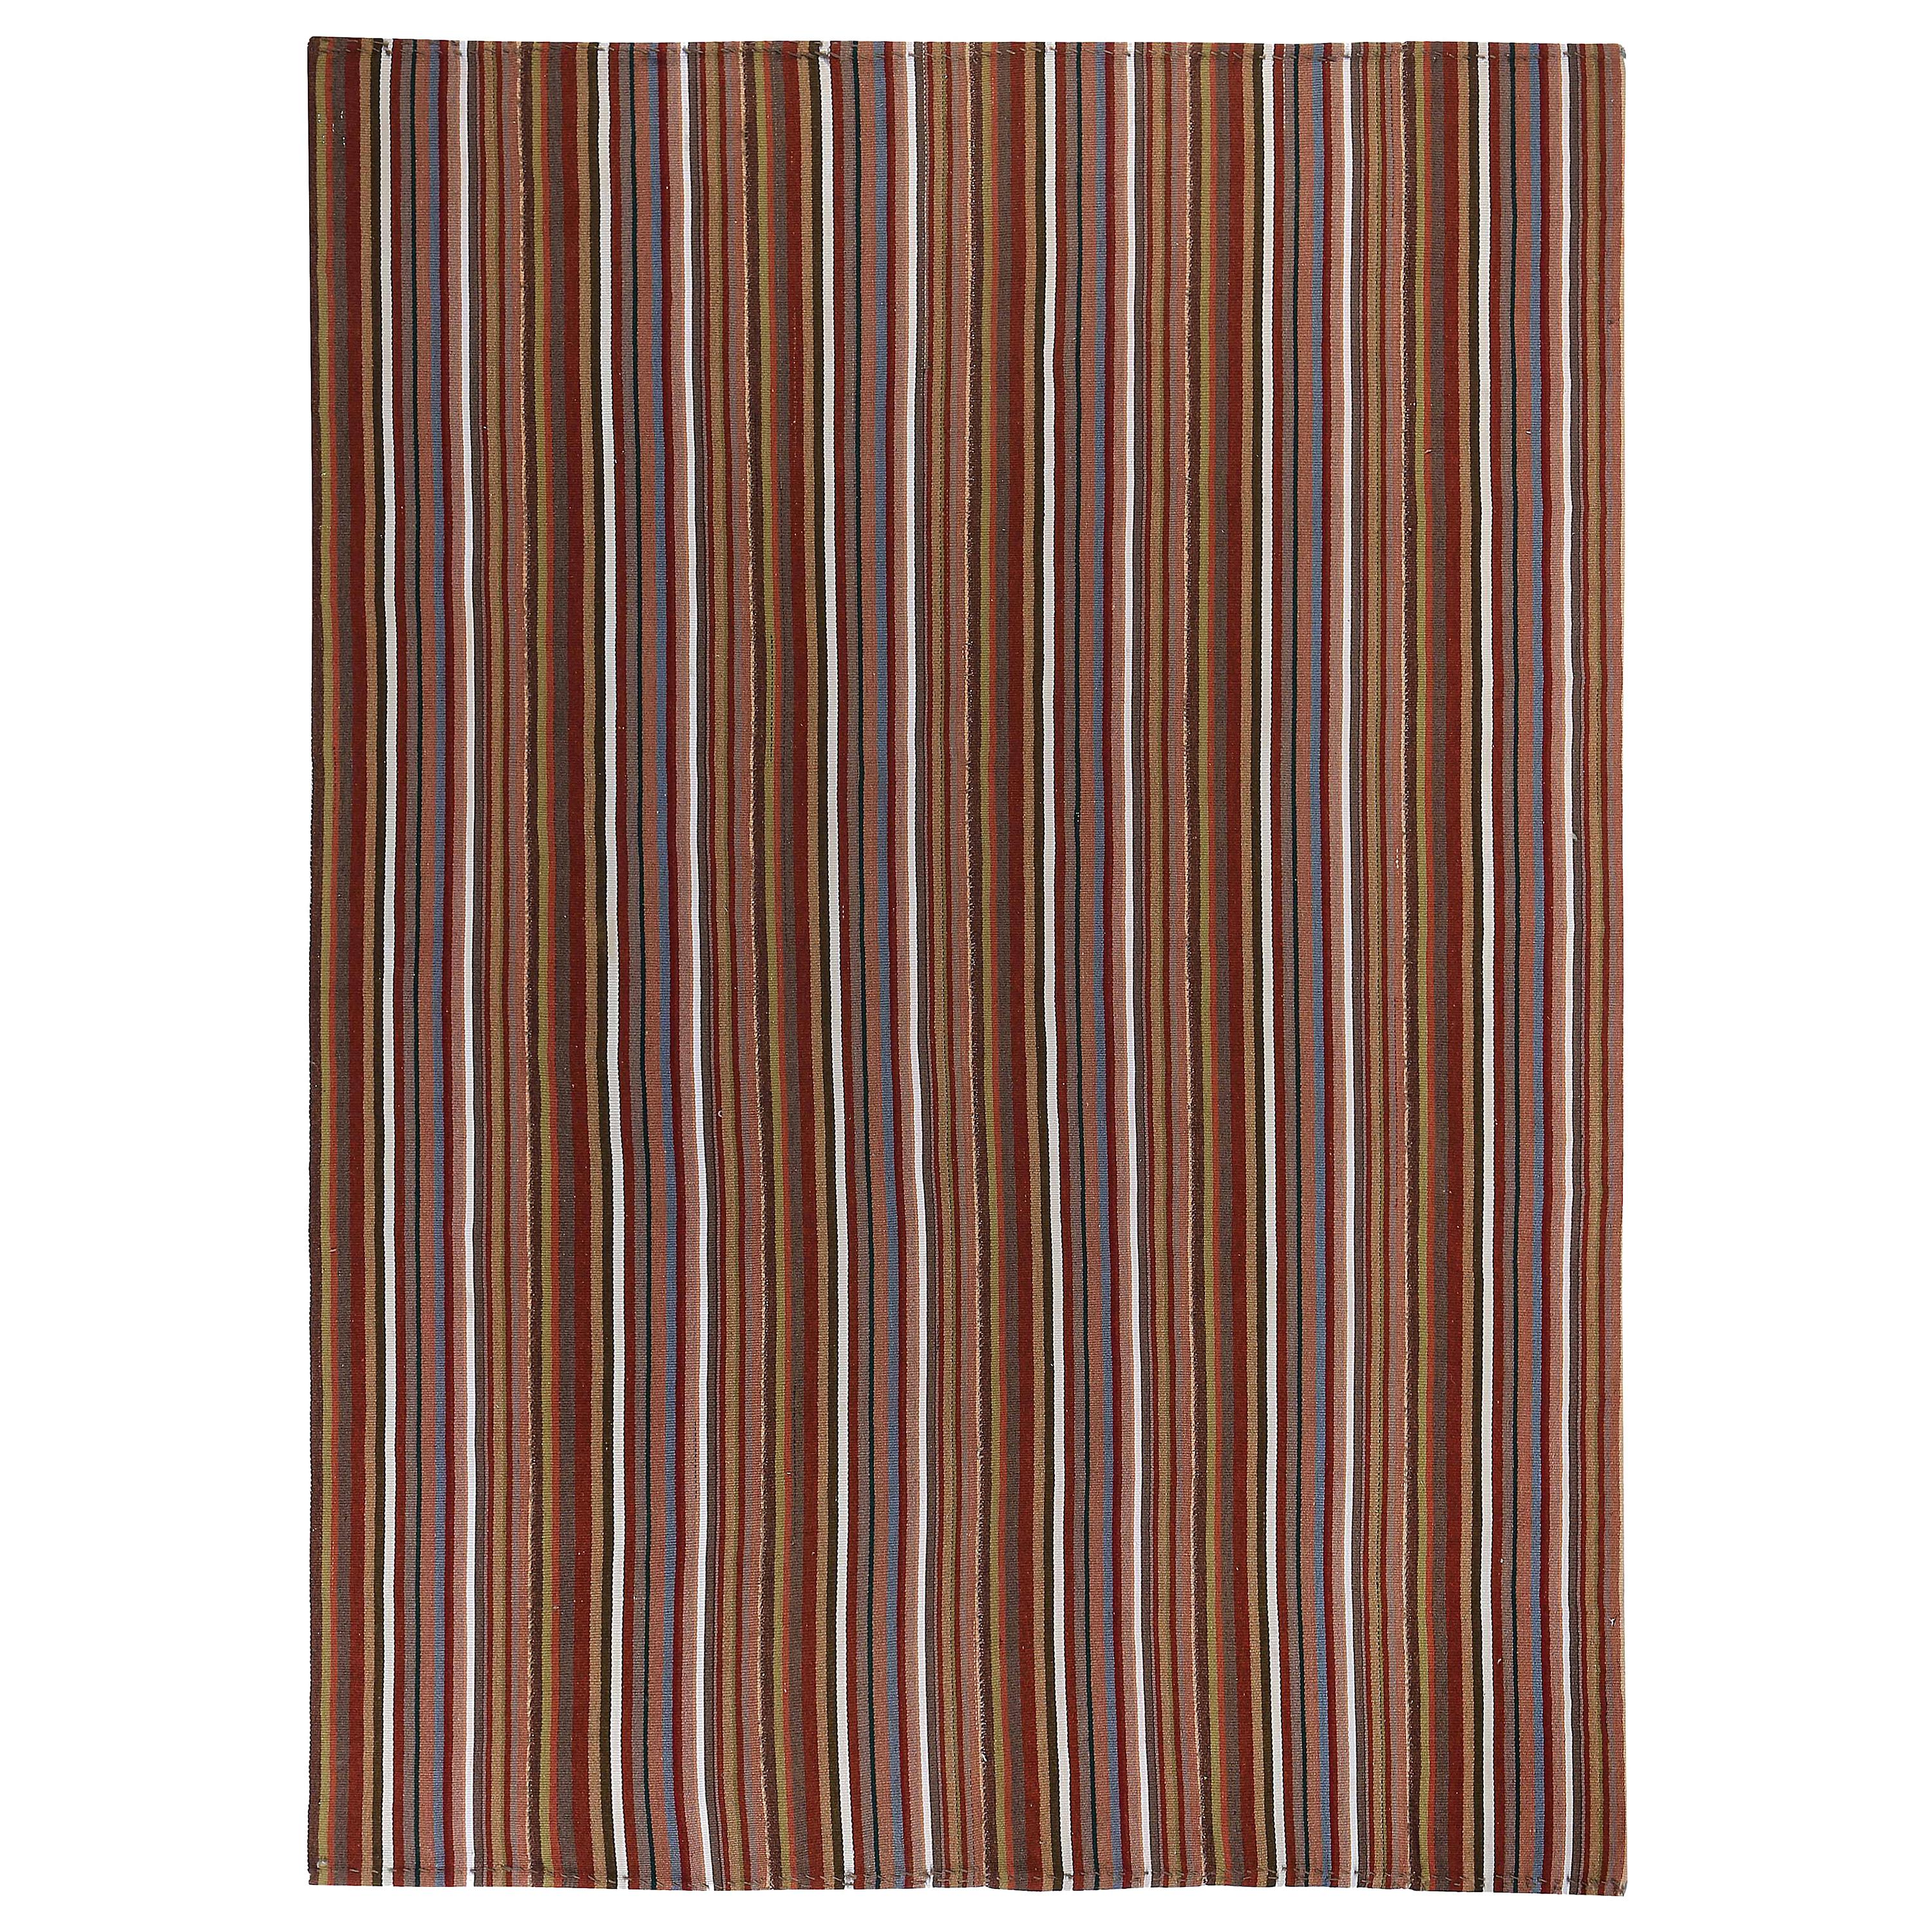 Modern Turkish Kilim Rug with Brown, Gray and White Stripes